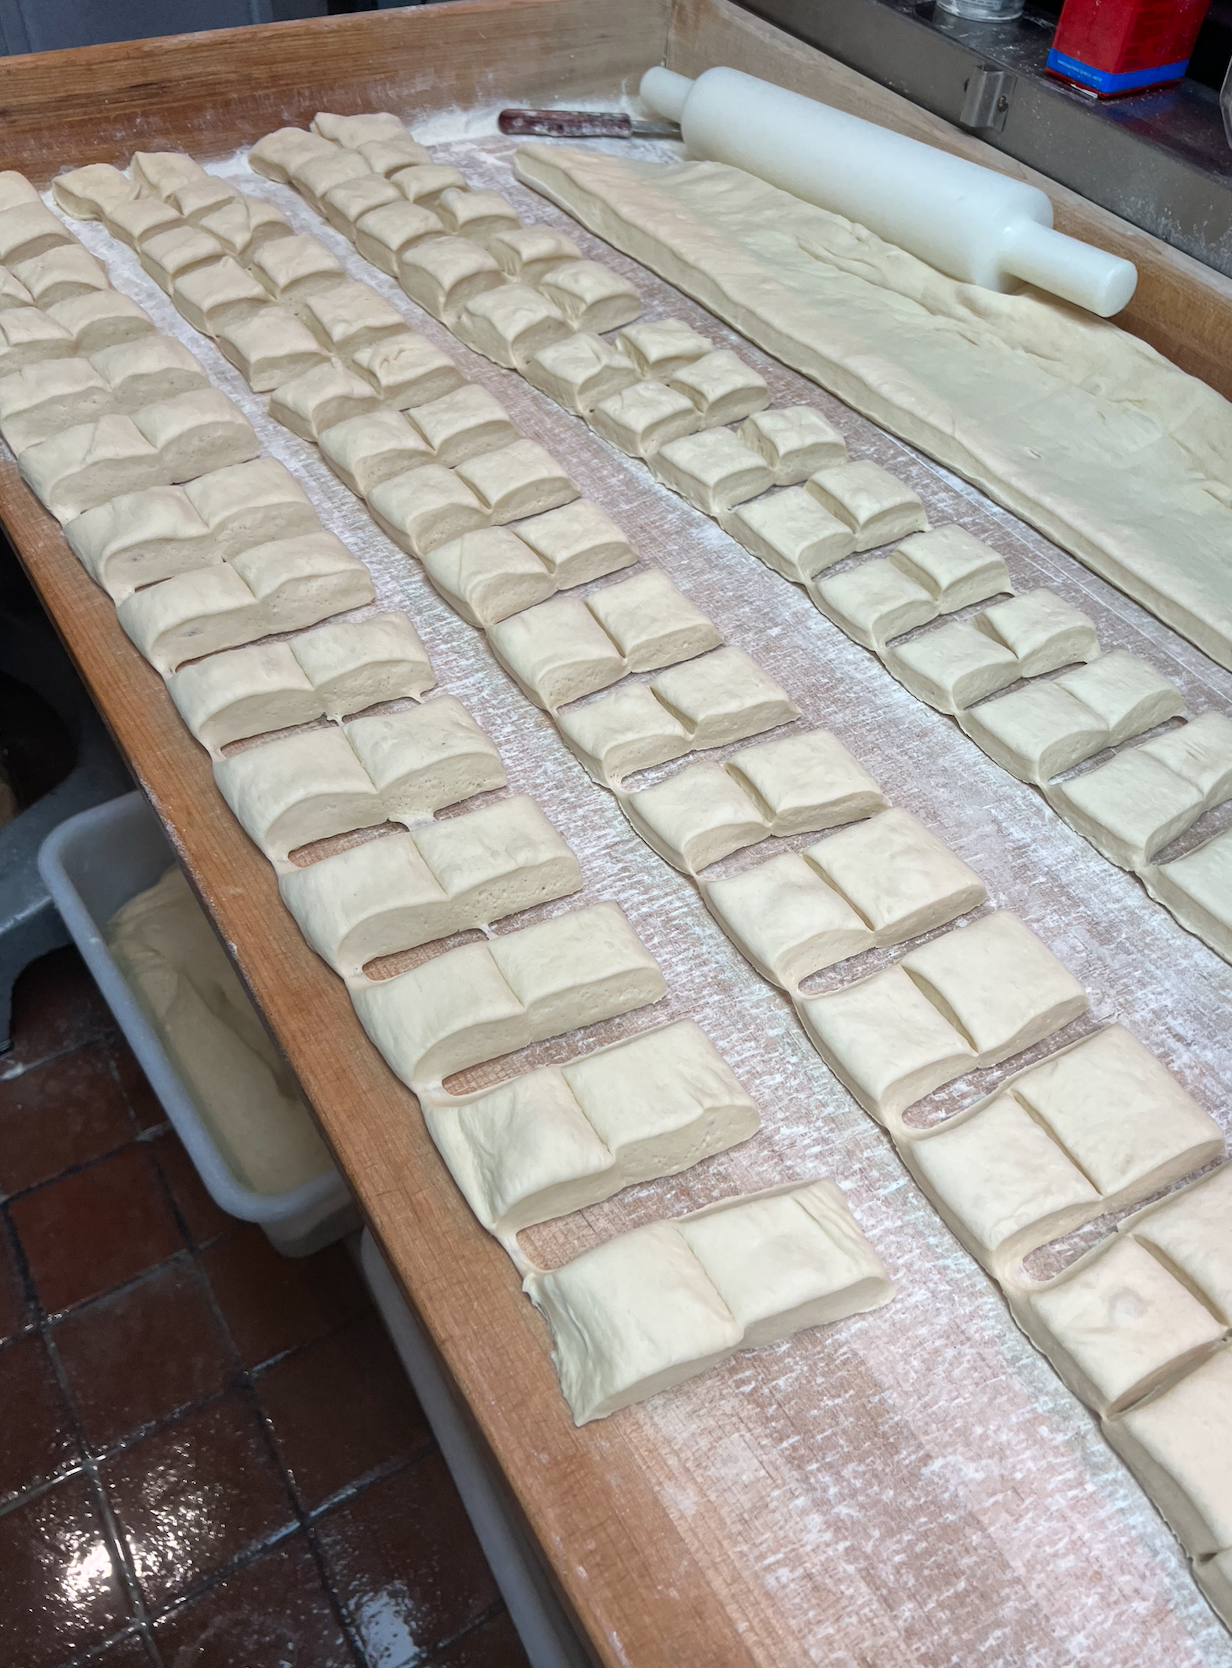 Rows and rows of rolls on a counter before being baked